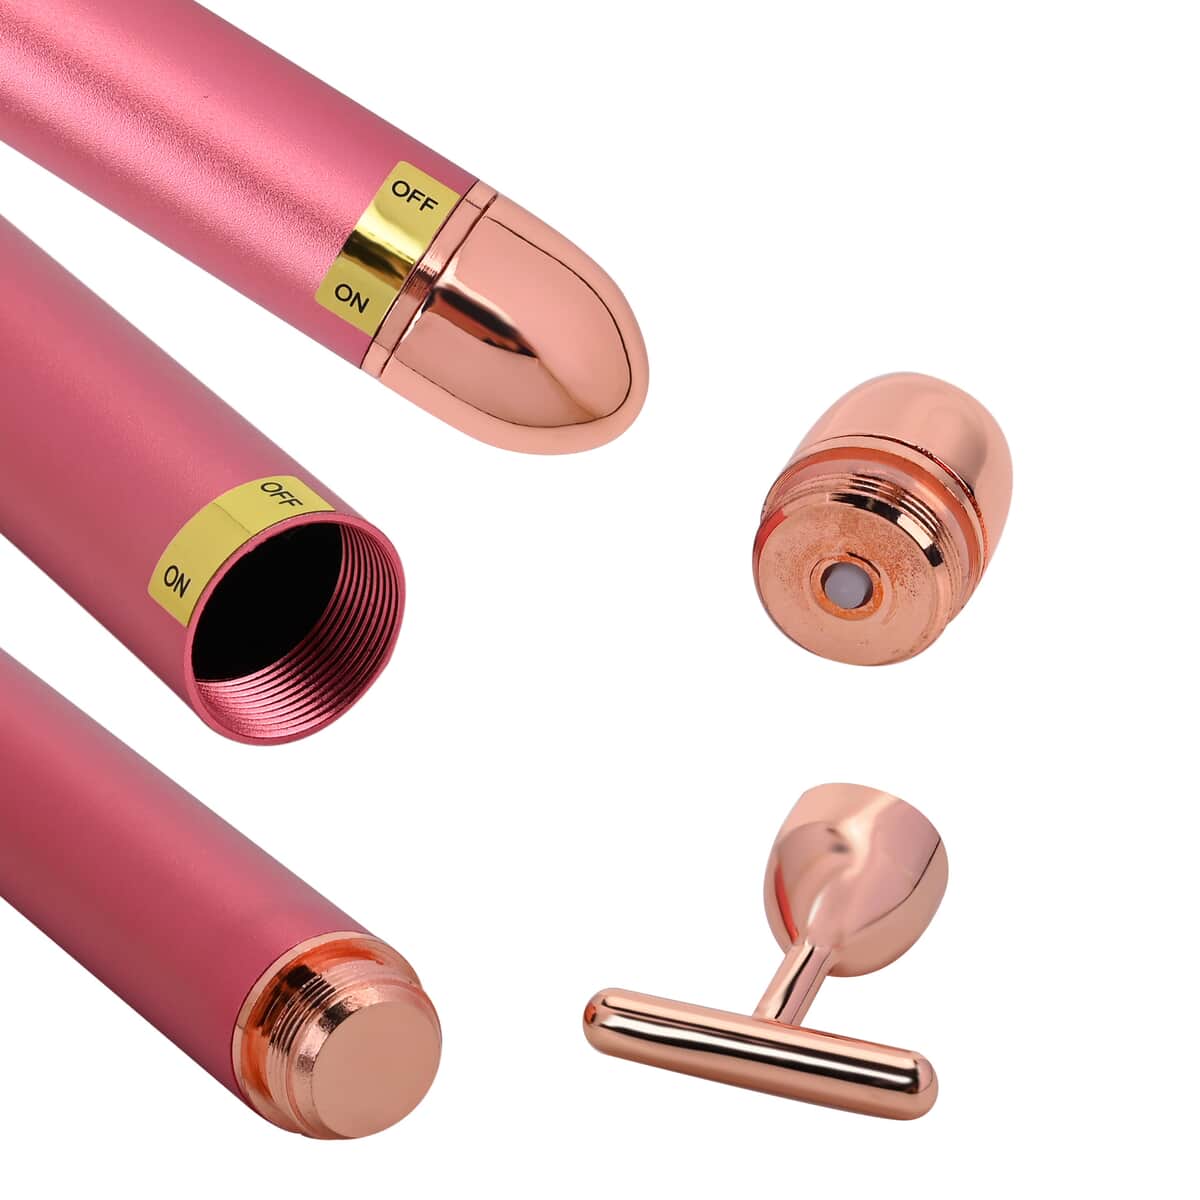 4-in-1 Face Massager Rollers with Four Interchangeable Massage Heads - Rose Gold, 1xAA Battery Not Including image number 5